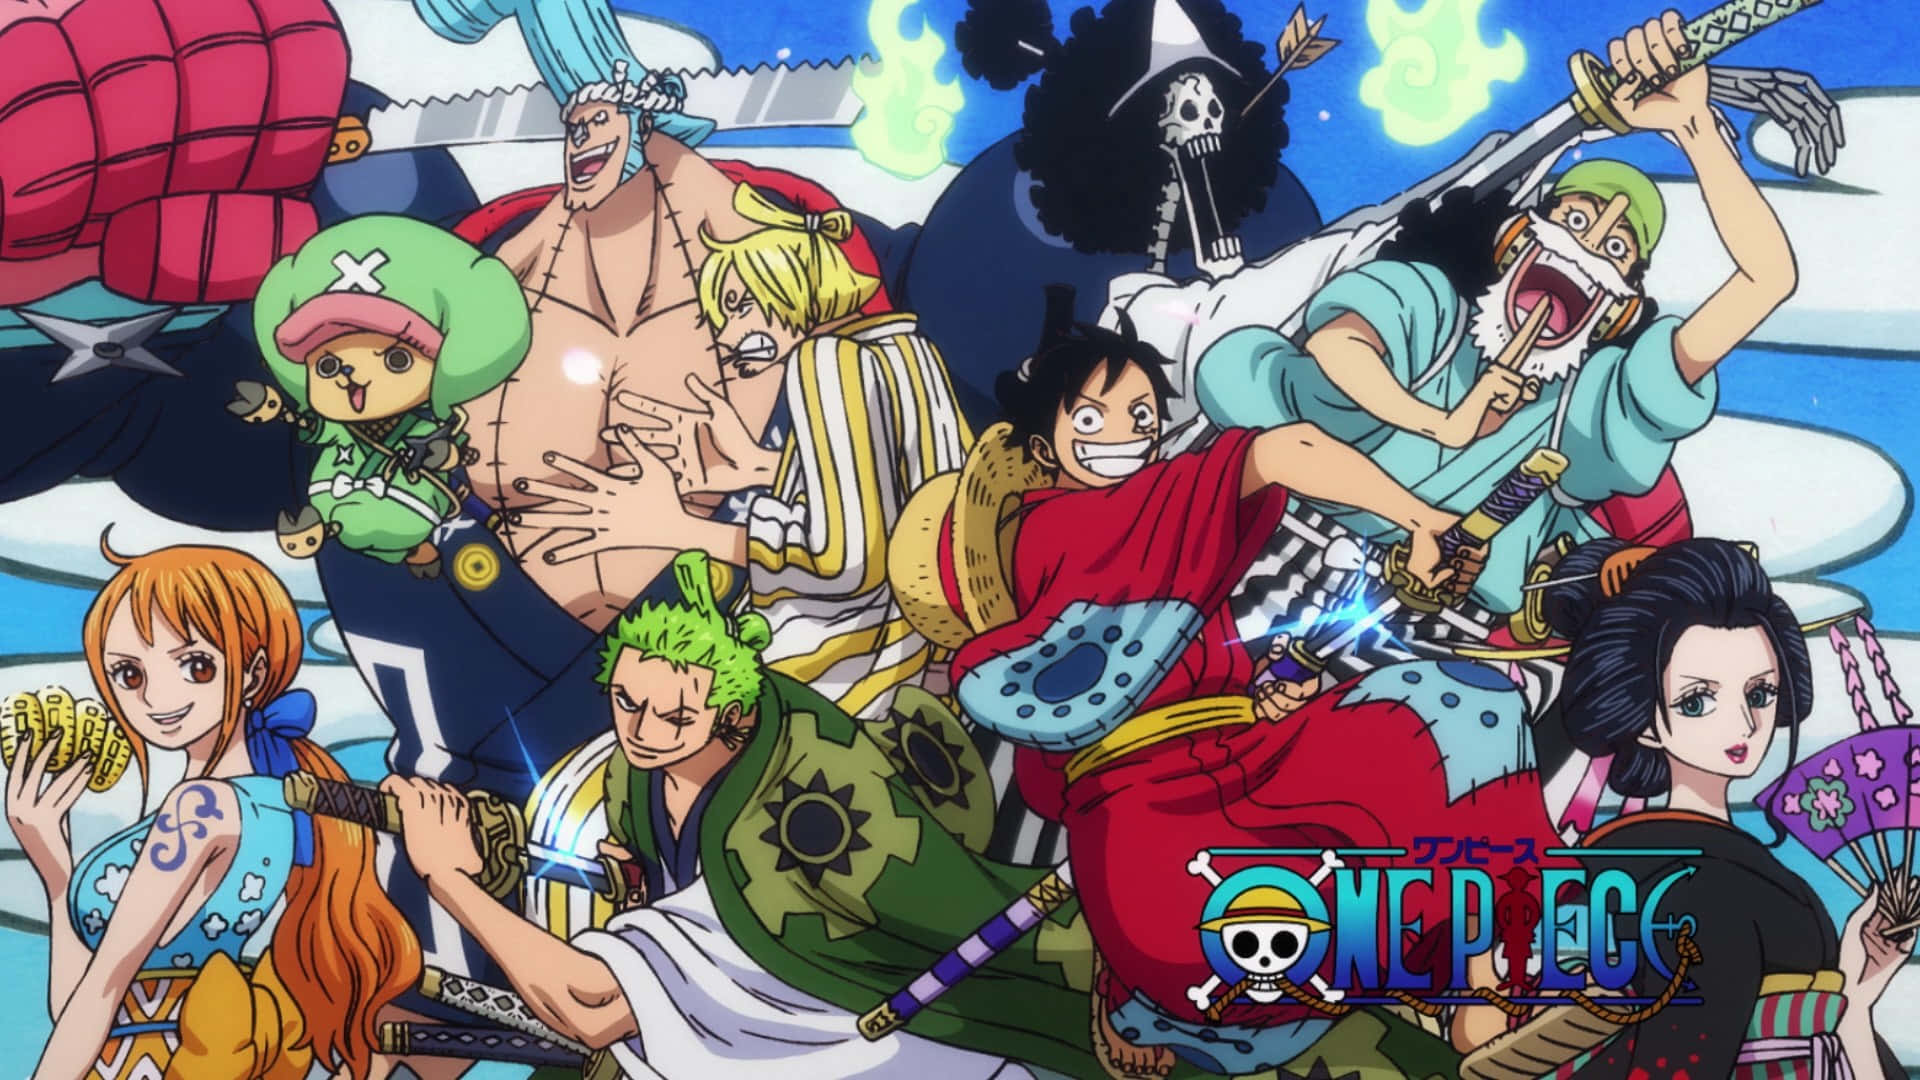 Samurai-core StrawHat Pirates in the recent Land of Wano arc. They were the best dressed in this arc in my opinion.